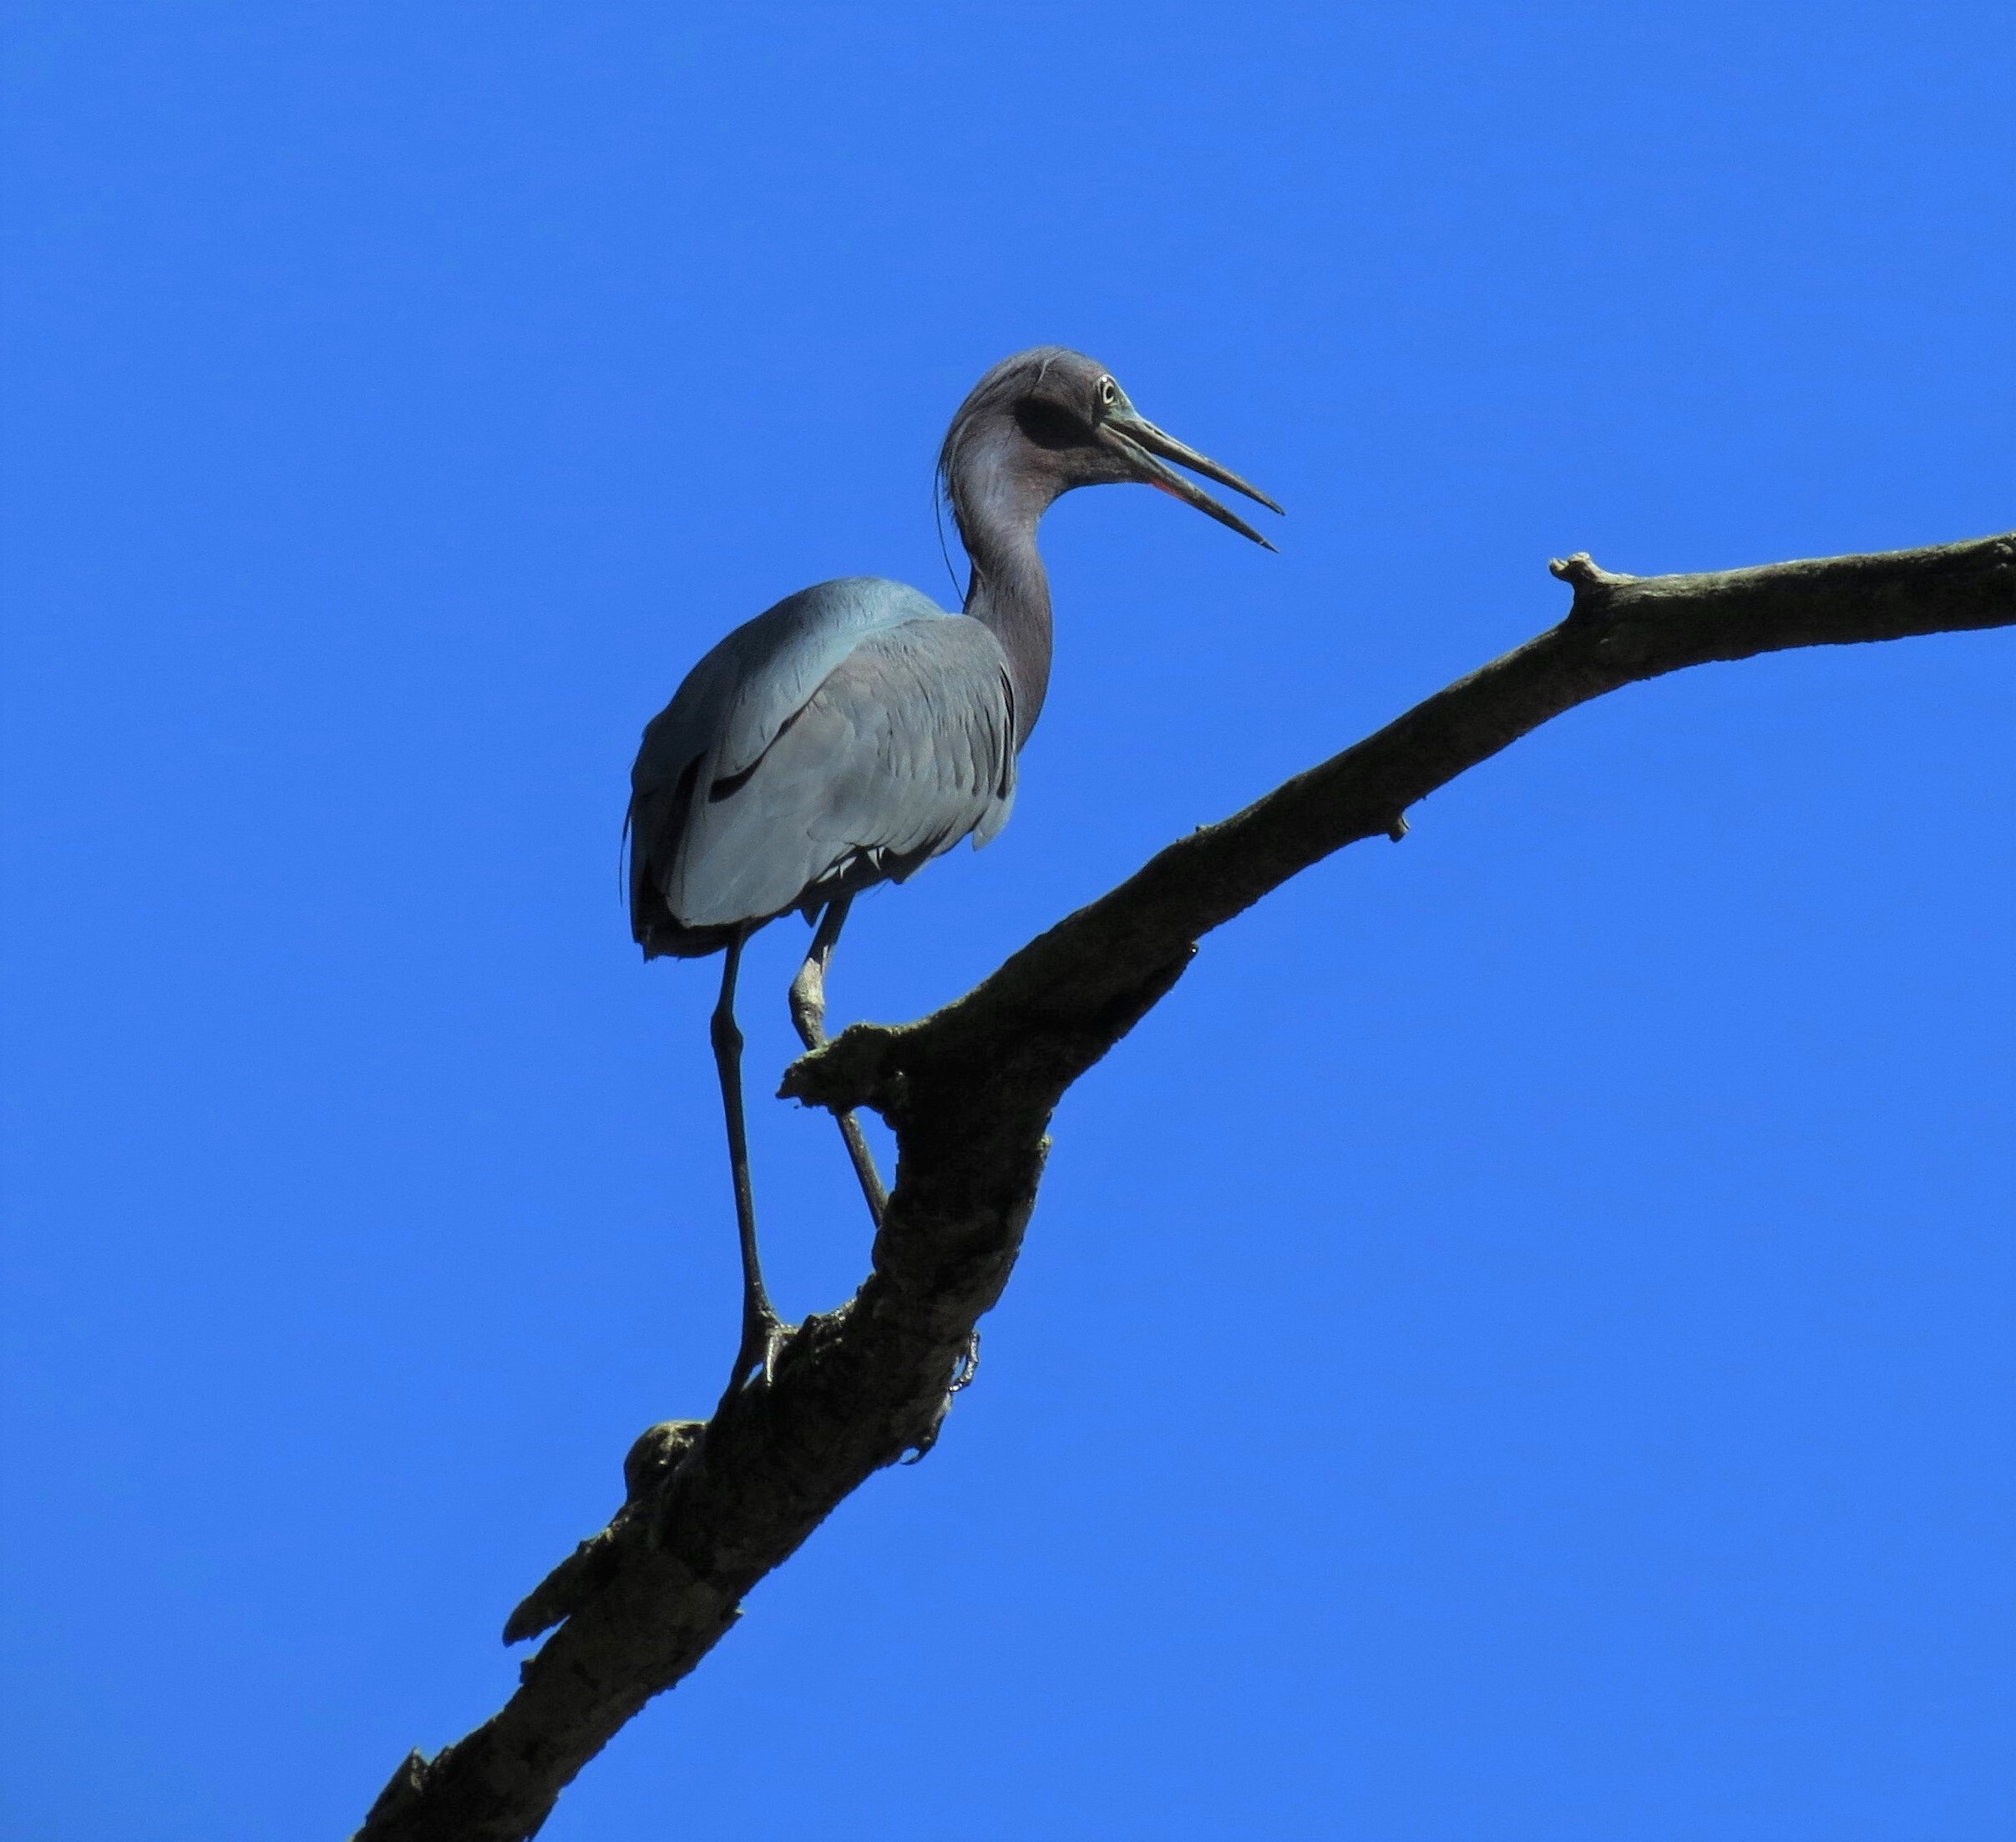 Mount Loretto’s wetlands attract a good variety of wading birds, including this Little Blue Heron. Photo: Keith Michael